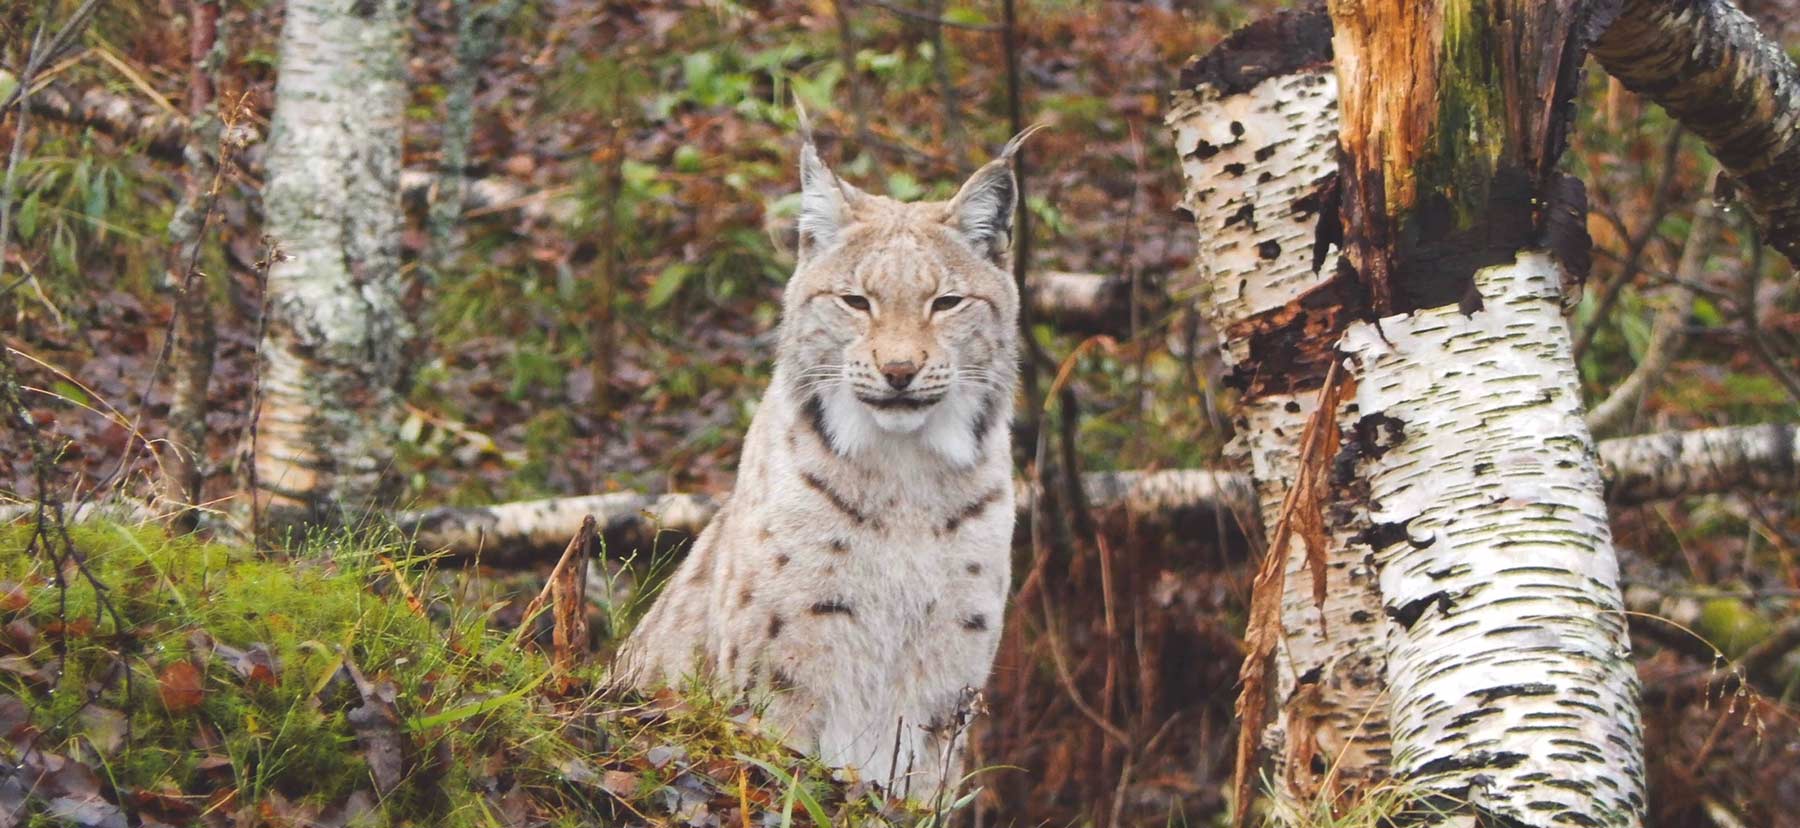 A Lynx stares down the camera from amidst the trees